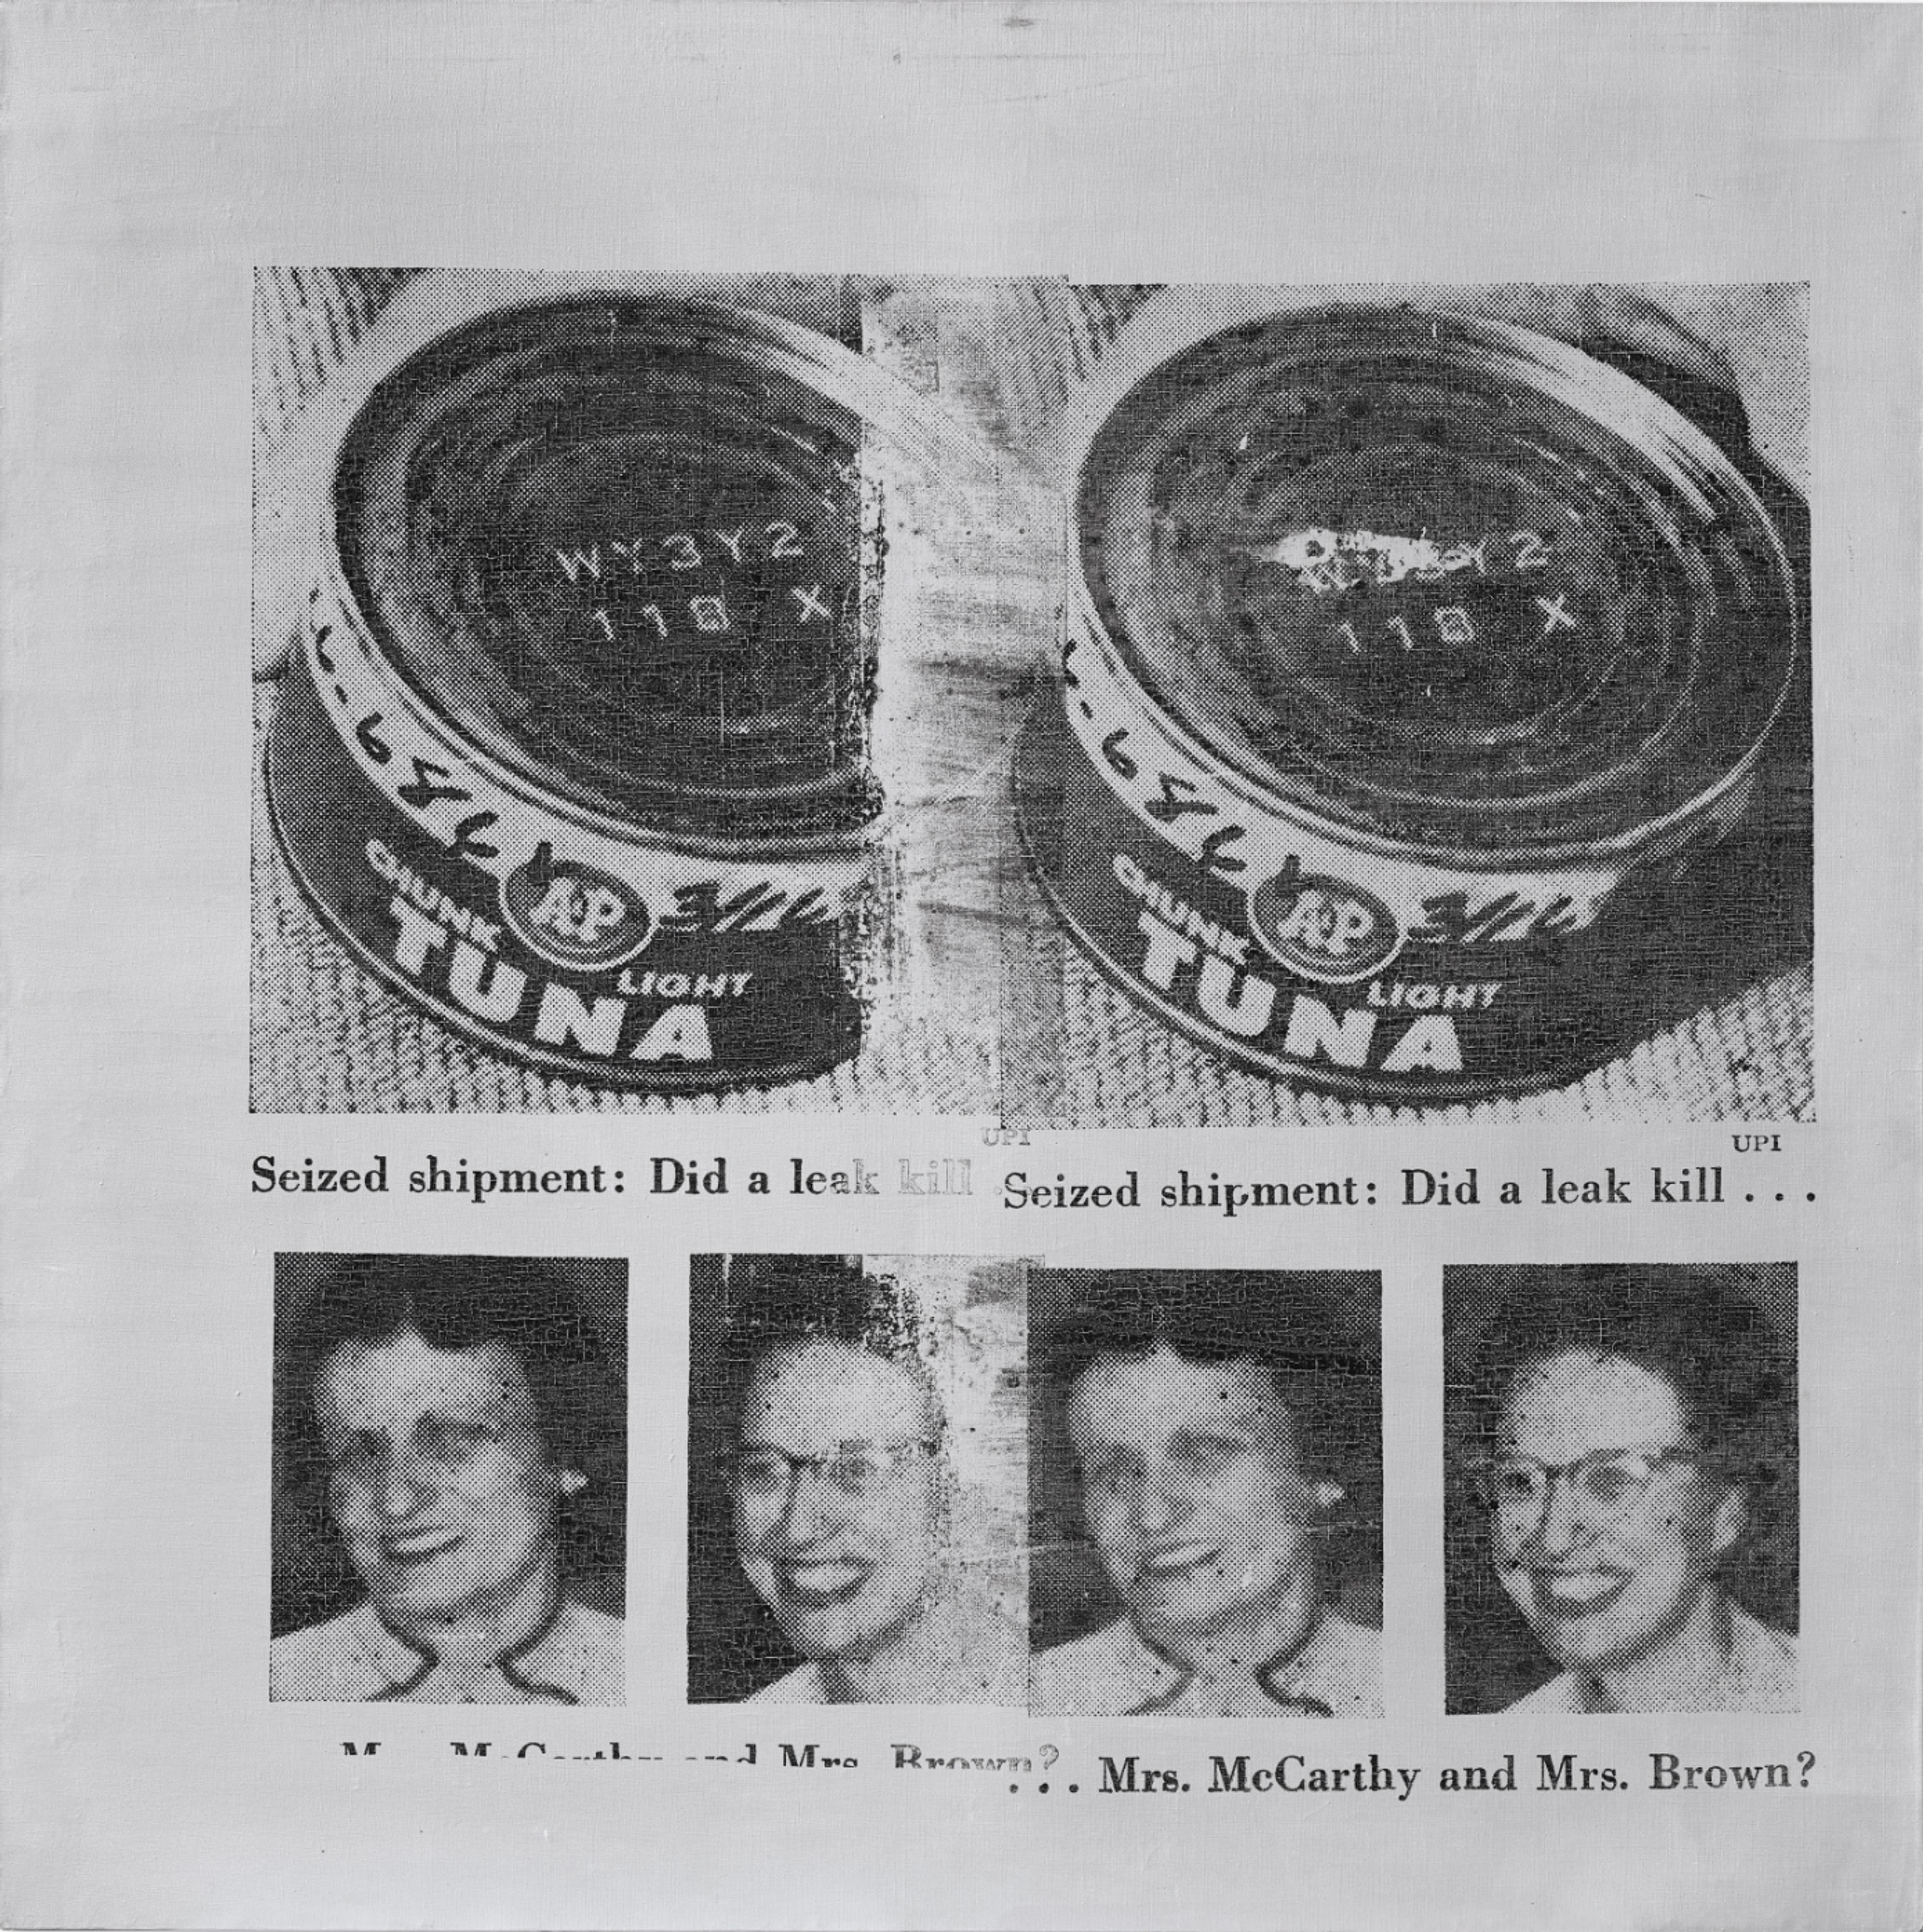 An image of the artwork Tunafish Disaster by Andy Warhol. A black and white reproduction of a newspaper headline, showing two tins of tuna atop two pairs. ofimages of the housewives killed.